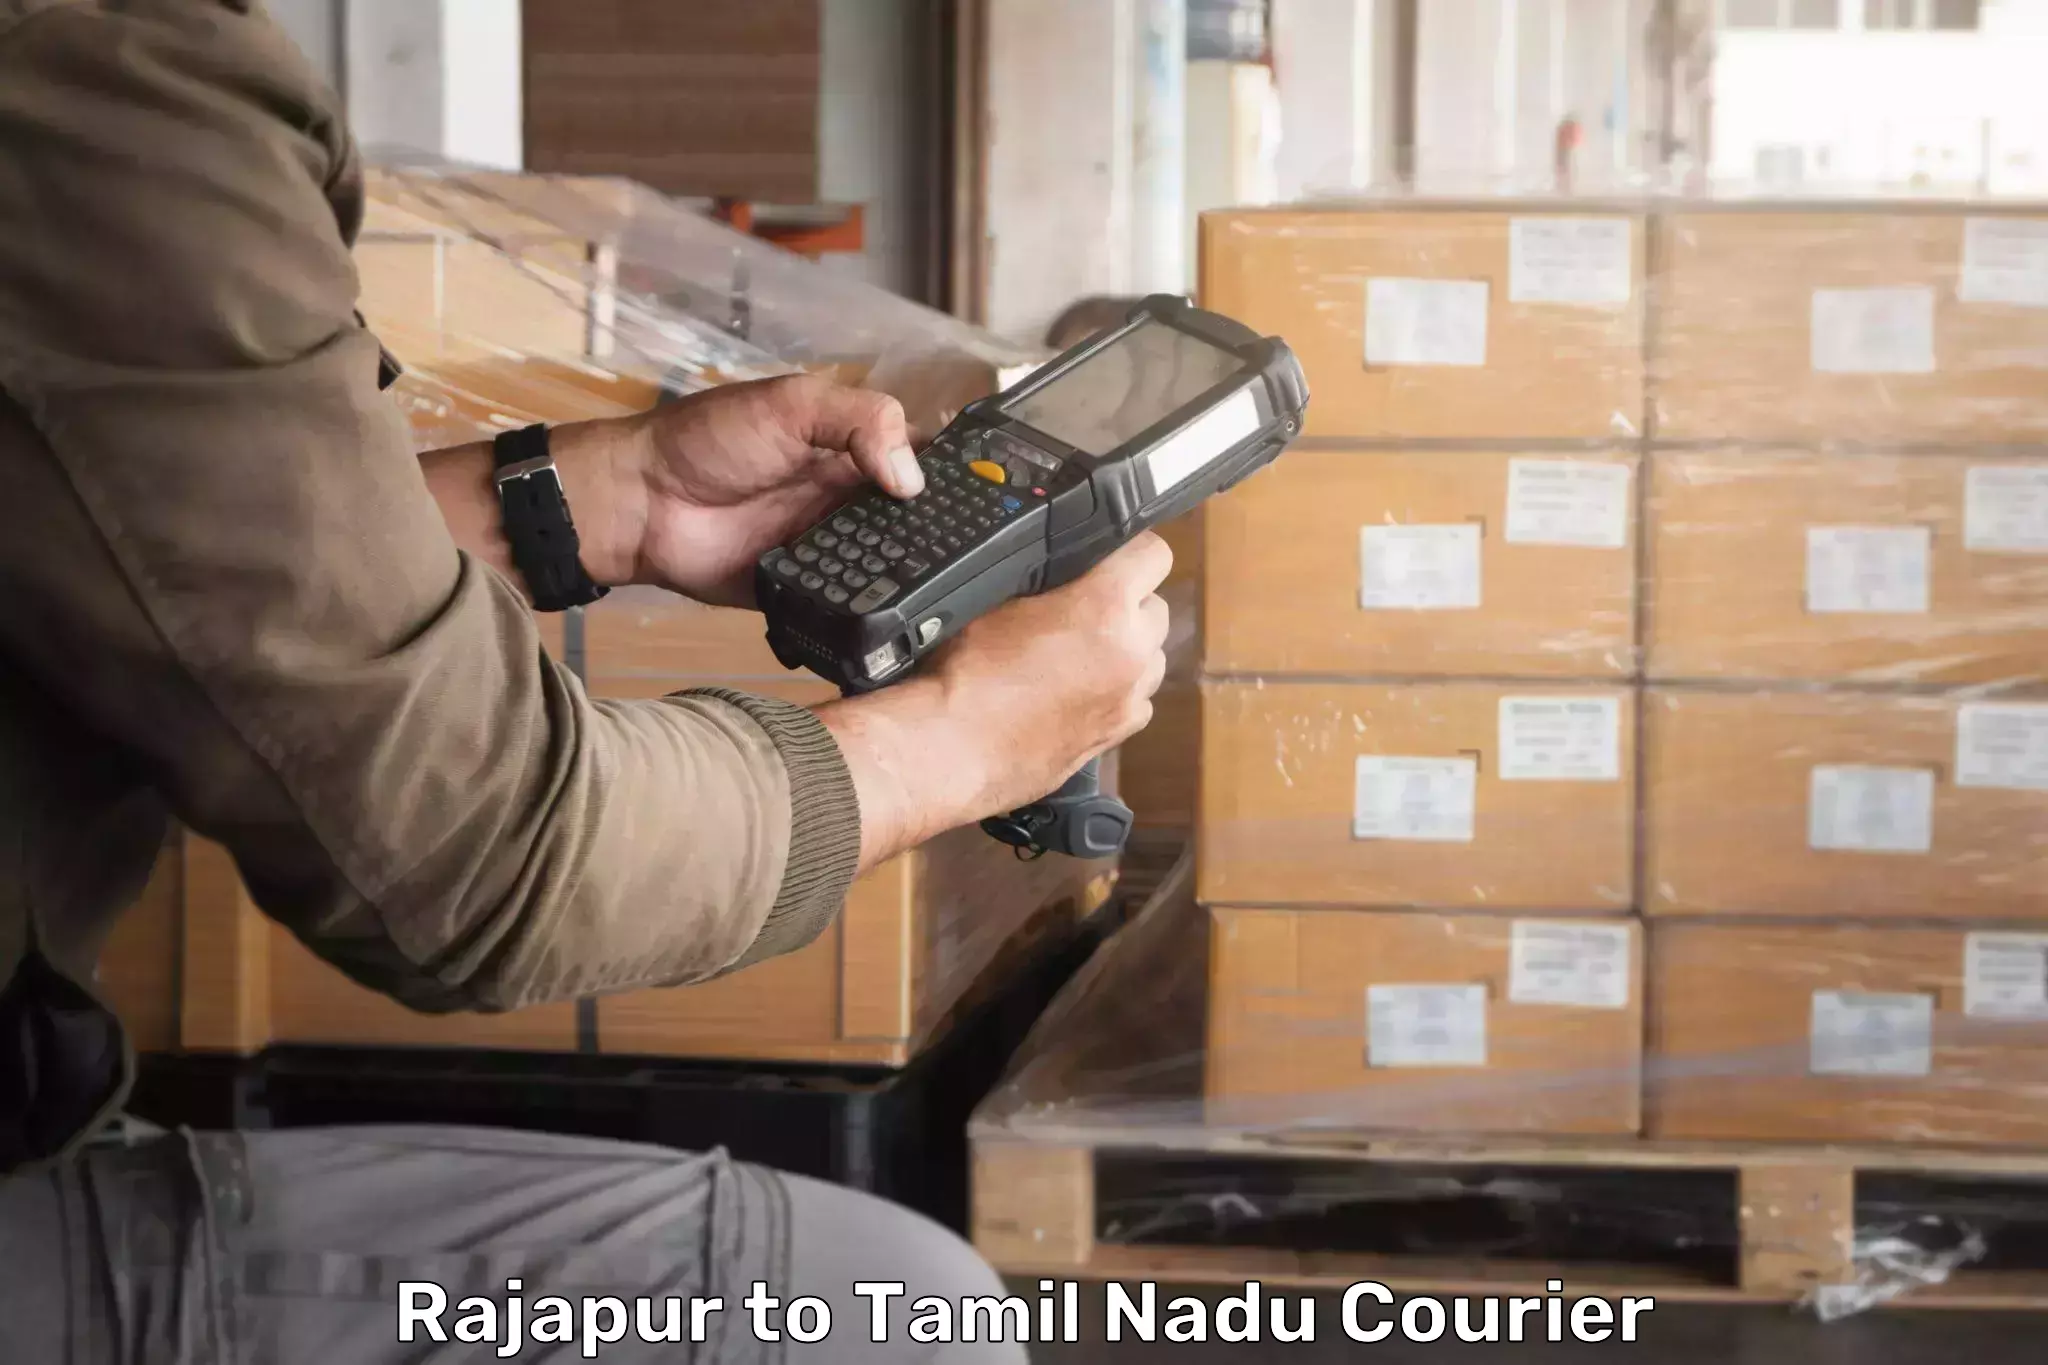 Dynamic courier operations Rajapur to Ennore Port Chennai